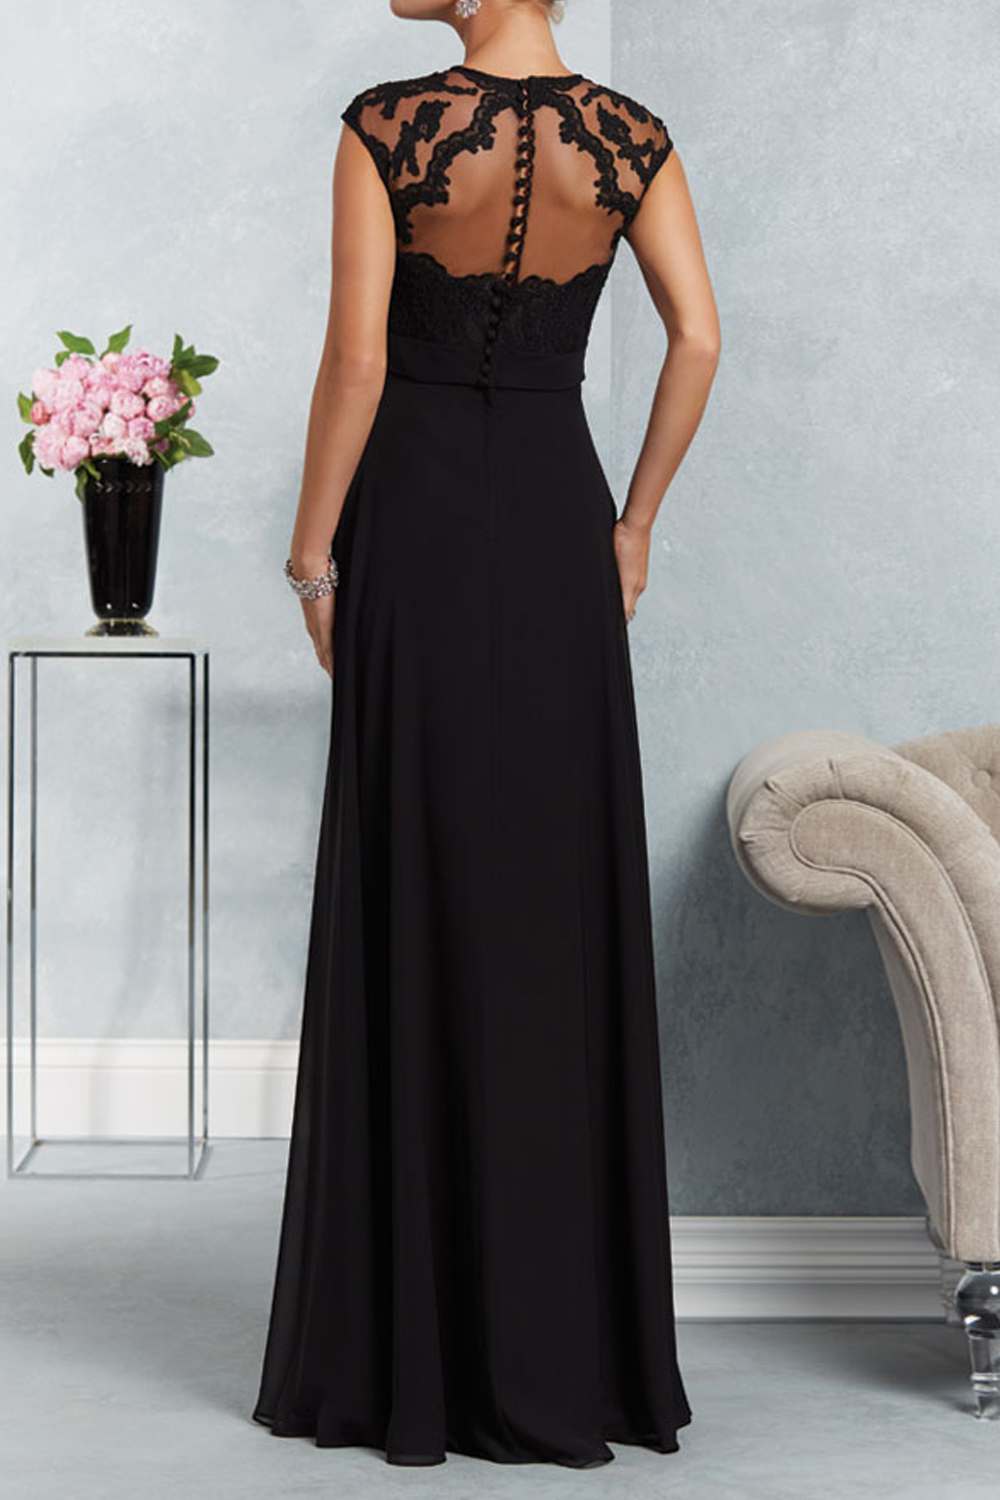 A Line Beaded Lace Chiffon Long Black Mother Of The Bride Dresses 602165